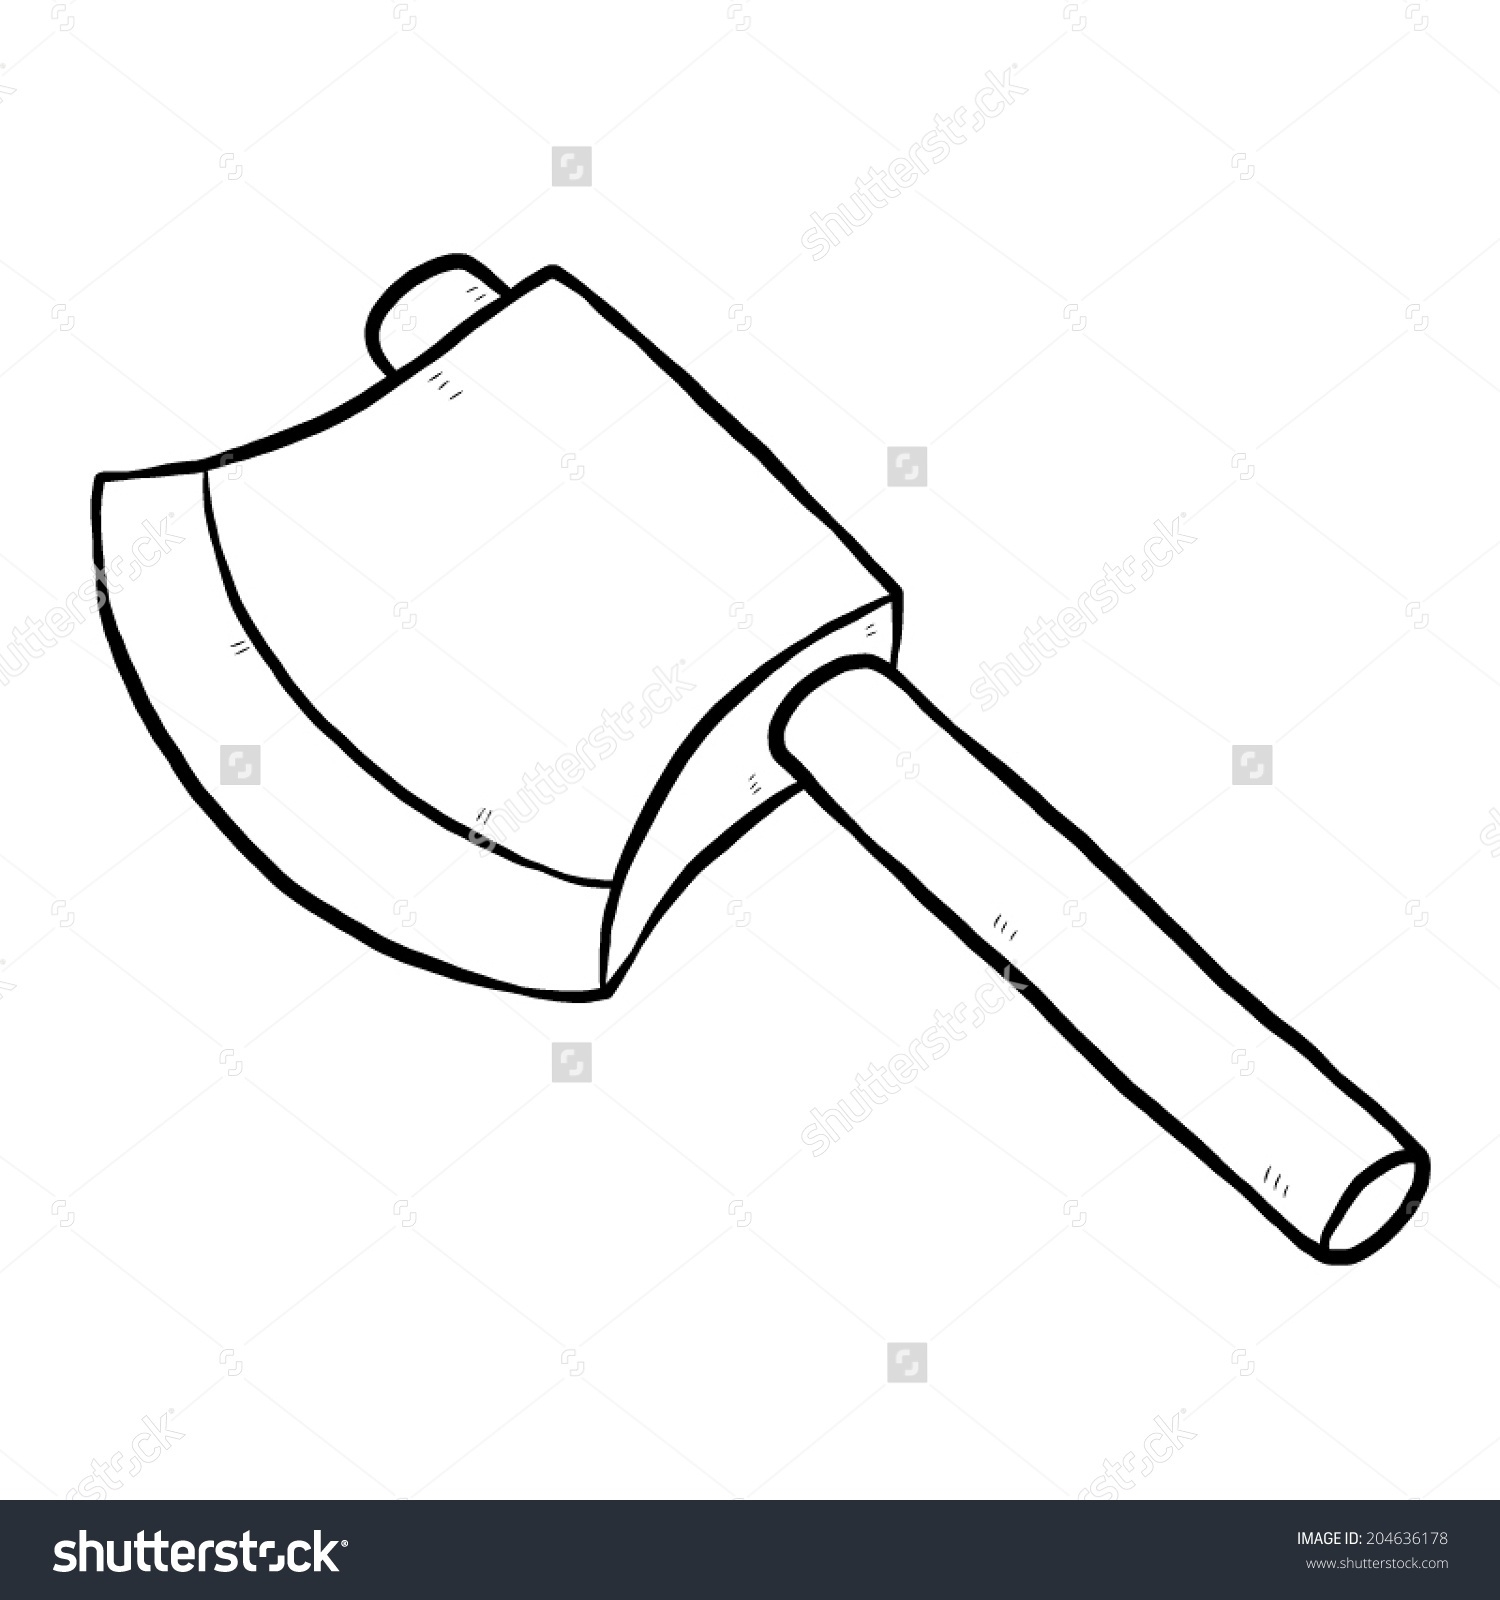 Letters clip art intended. Axe clipart black and white